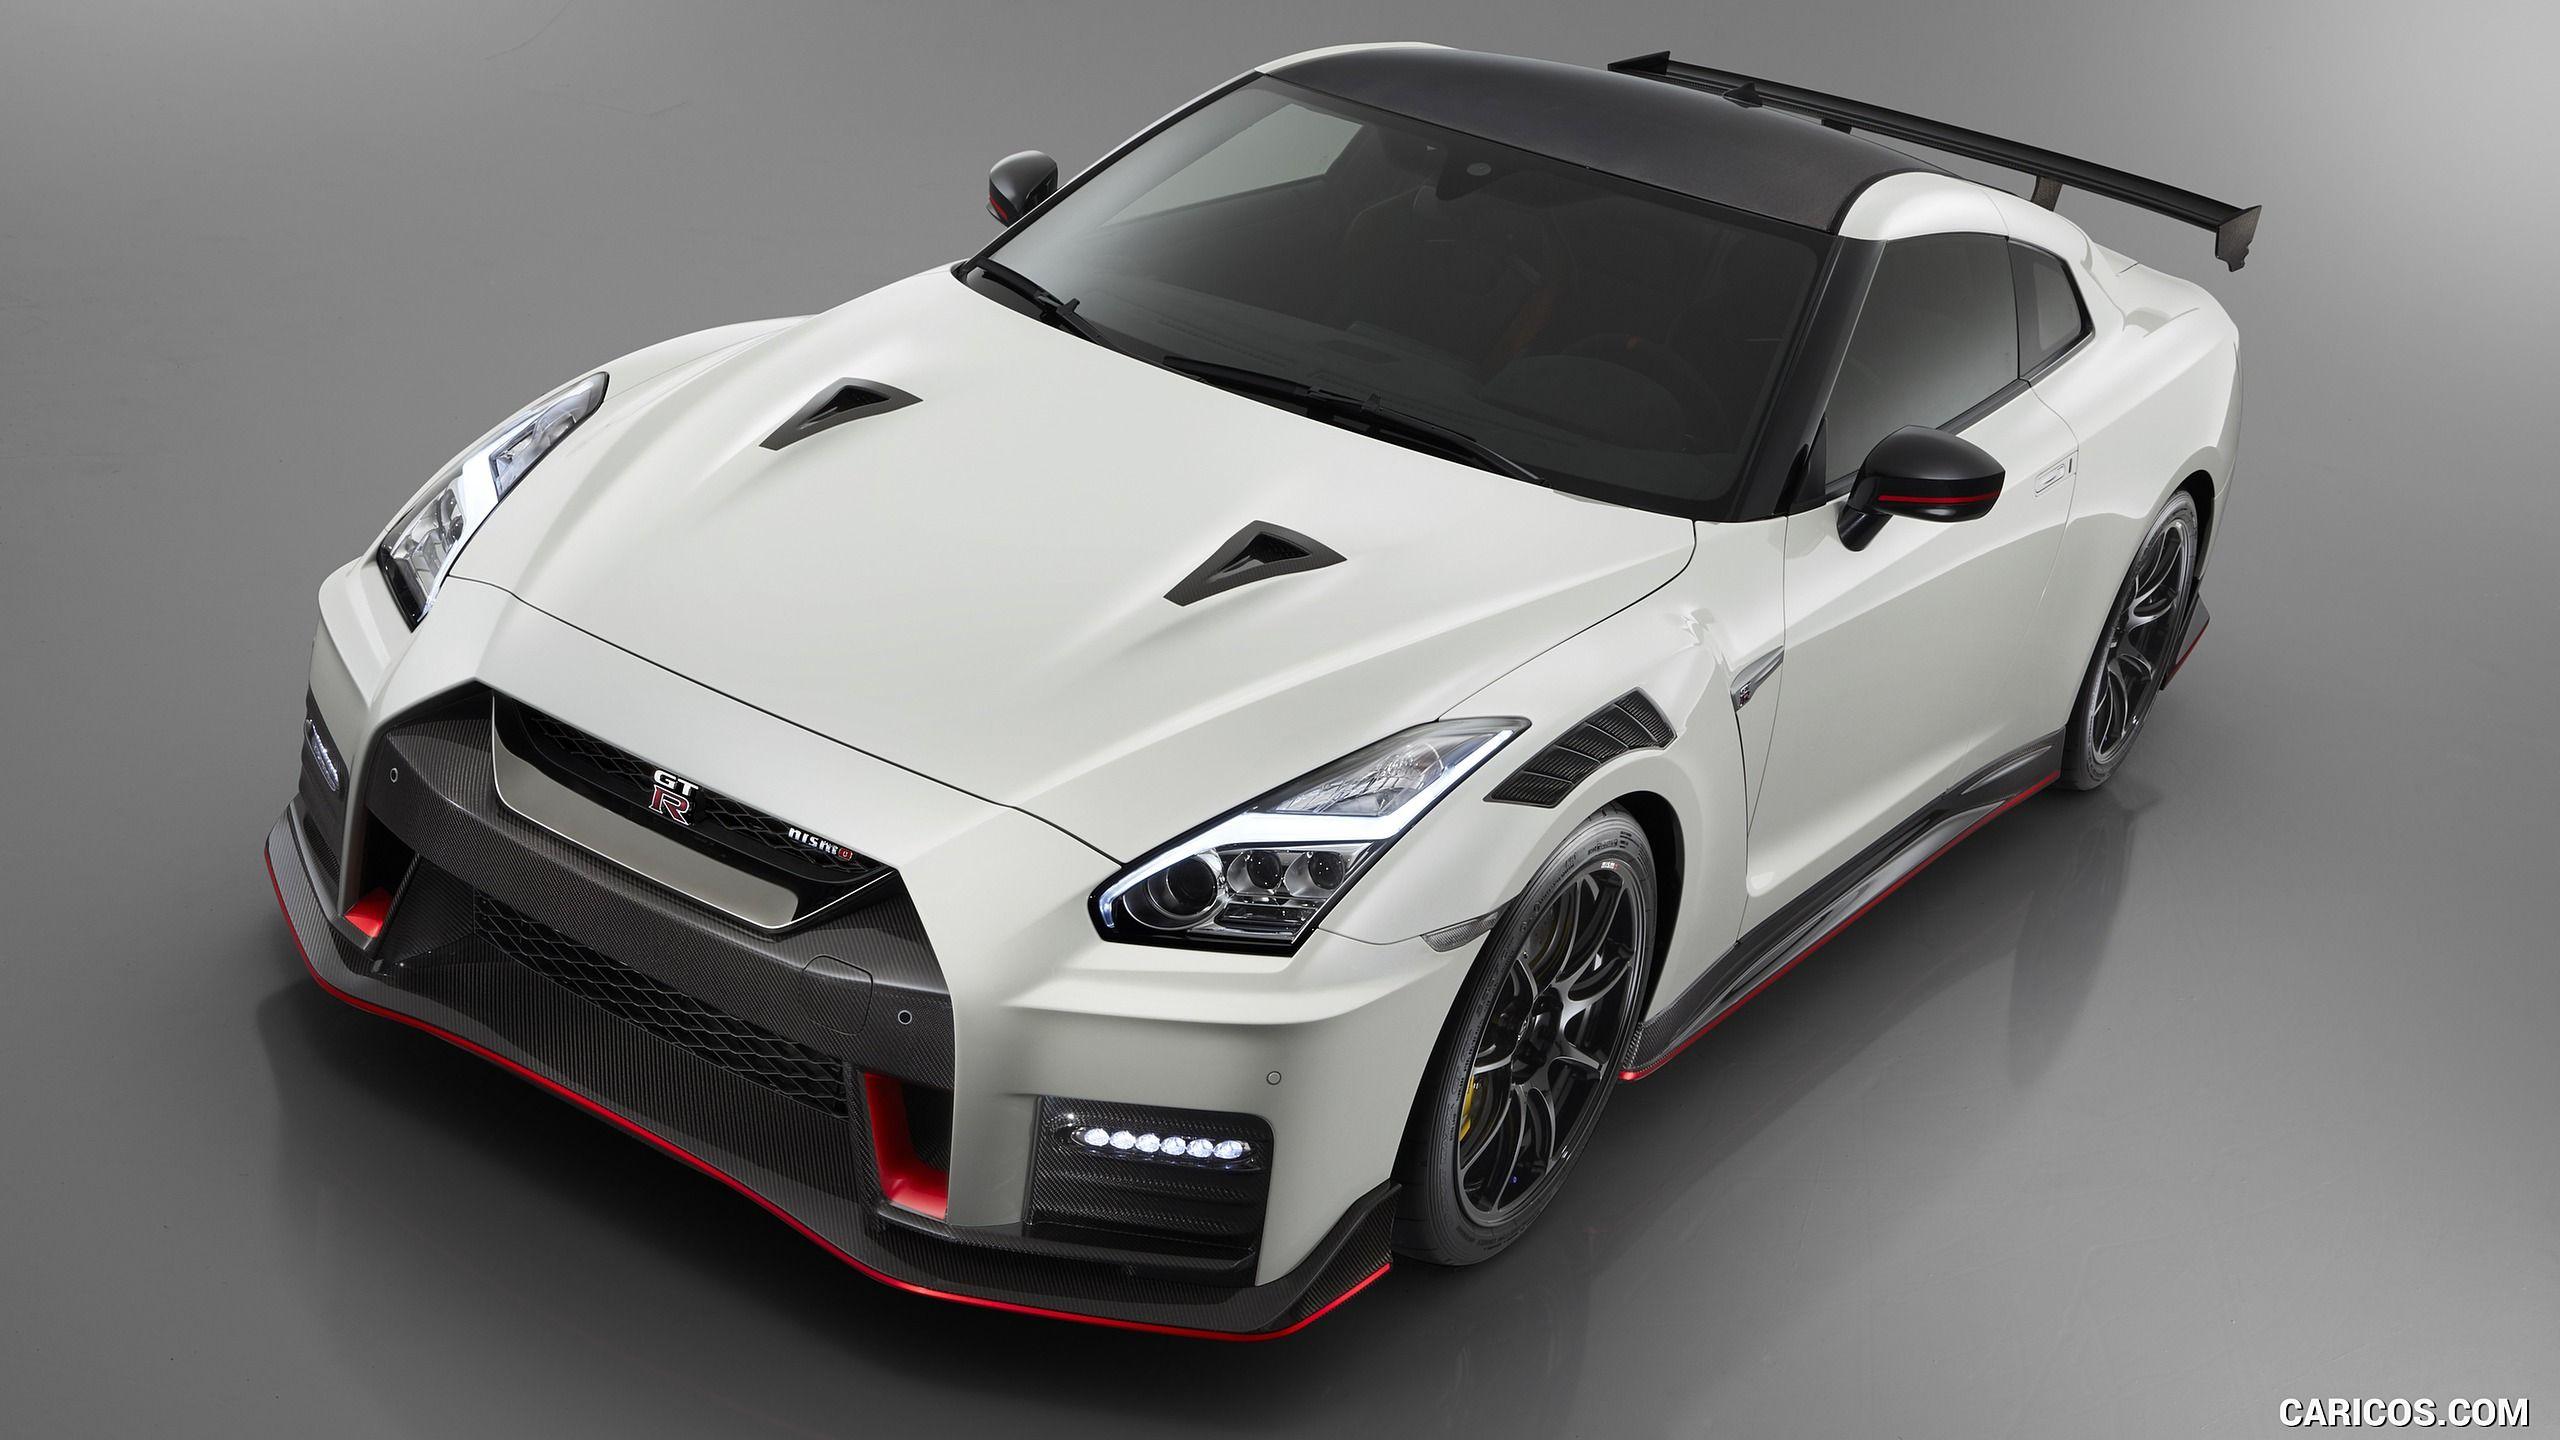 Nissan Gt R Nismo Wallpapers Top Free Nissan Gt R Nismo Backgrounds Wallpaperaccess